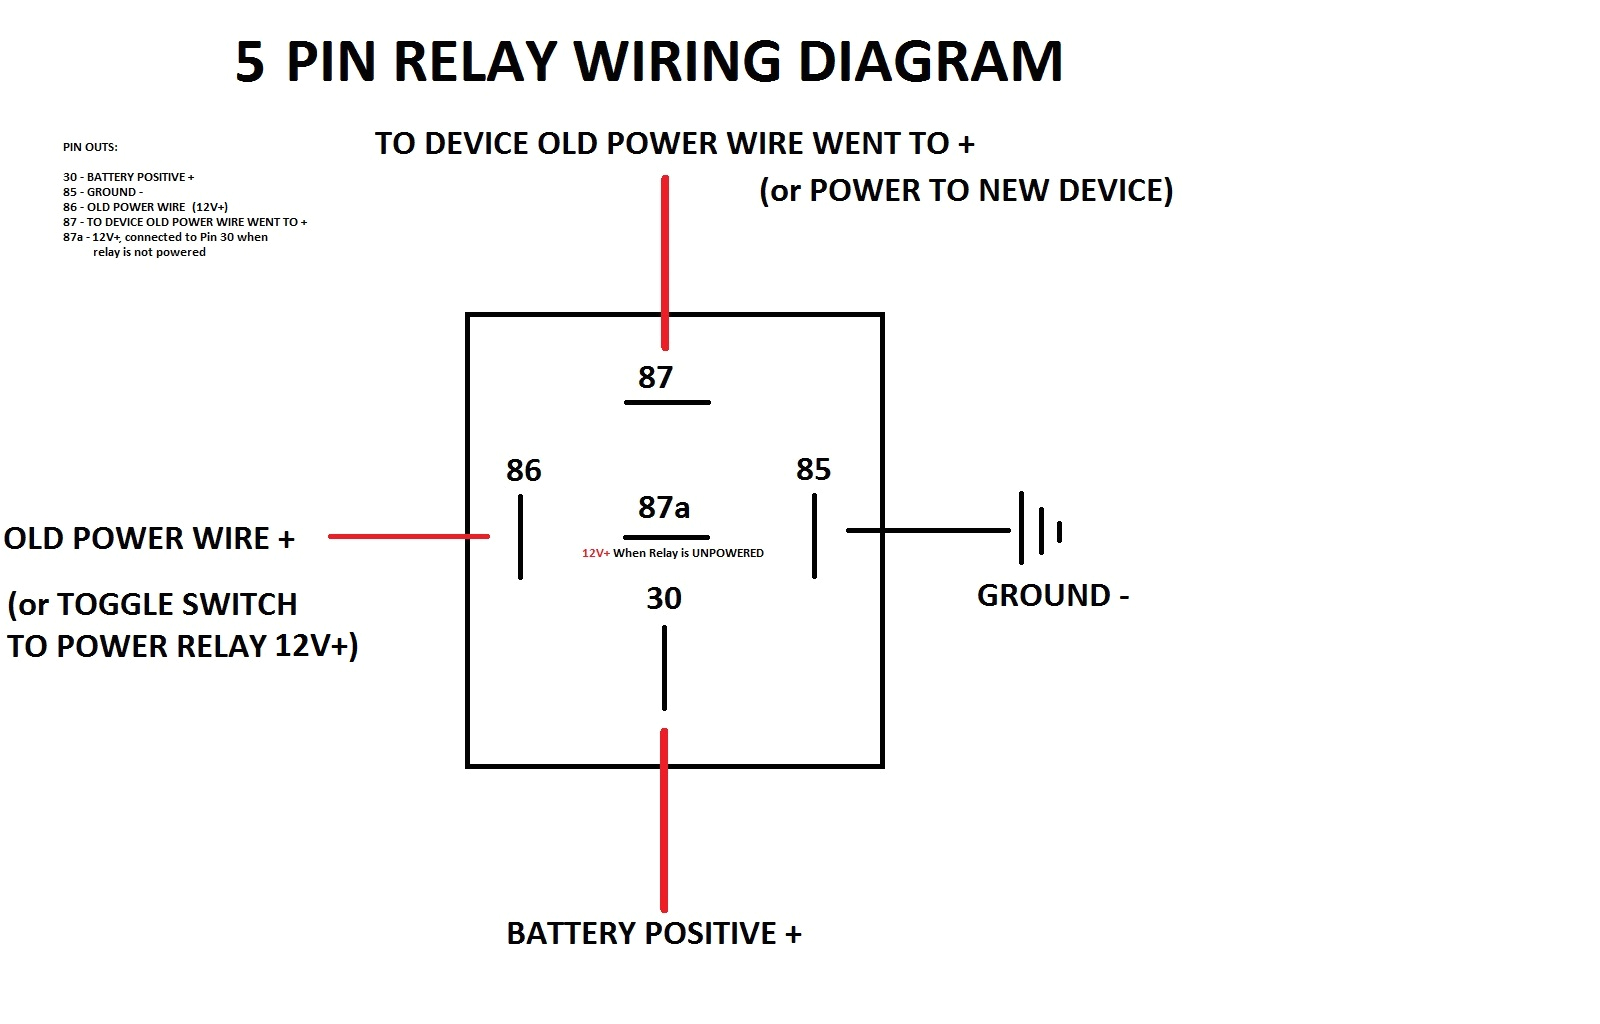 5 wire relay schematic data diagram schematic all relay wiring diagrams